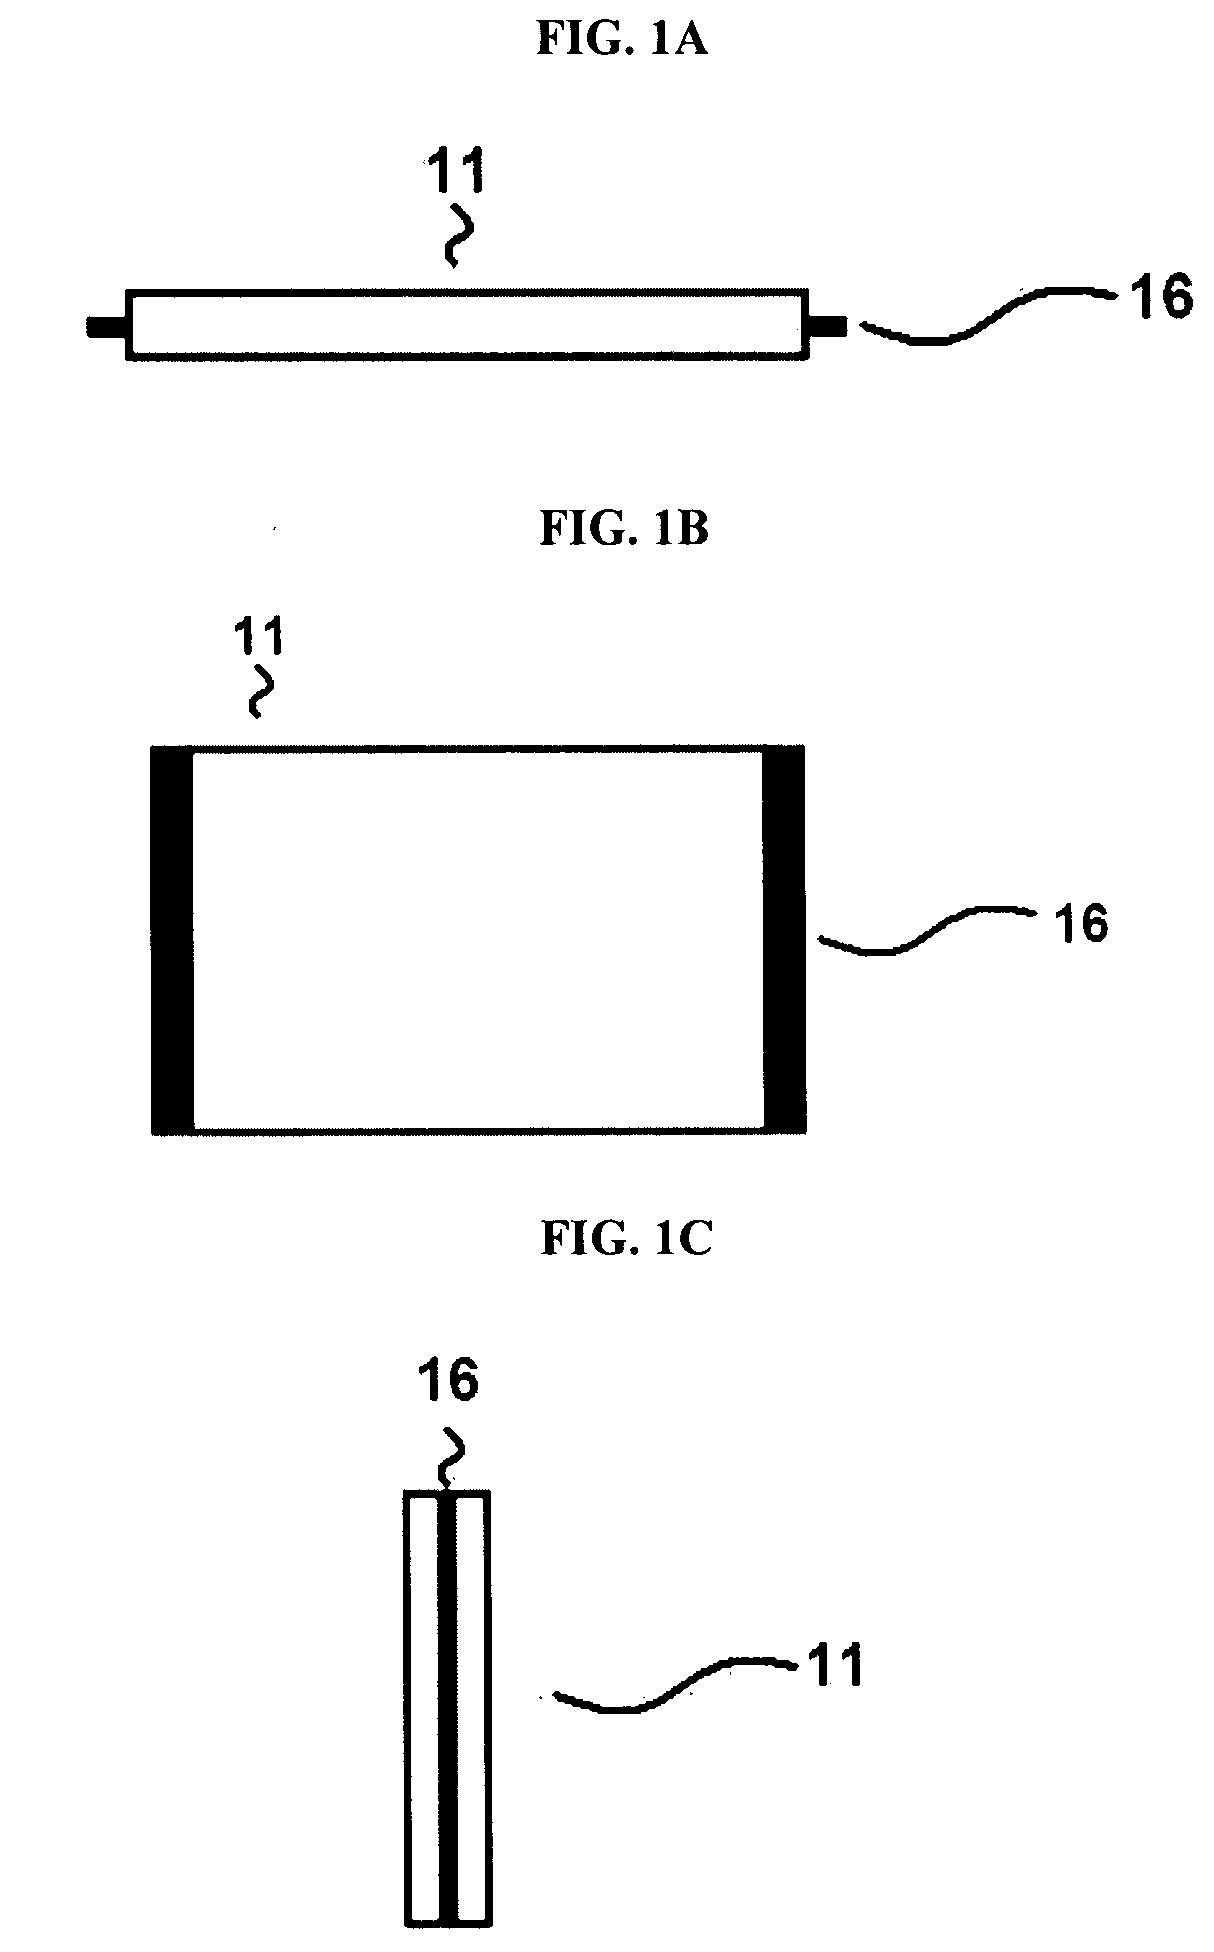 Methods and devices for the delivery of therapeutic gases including nitric oxide